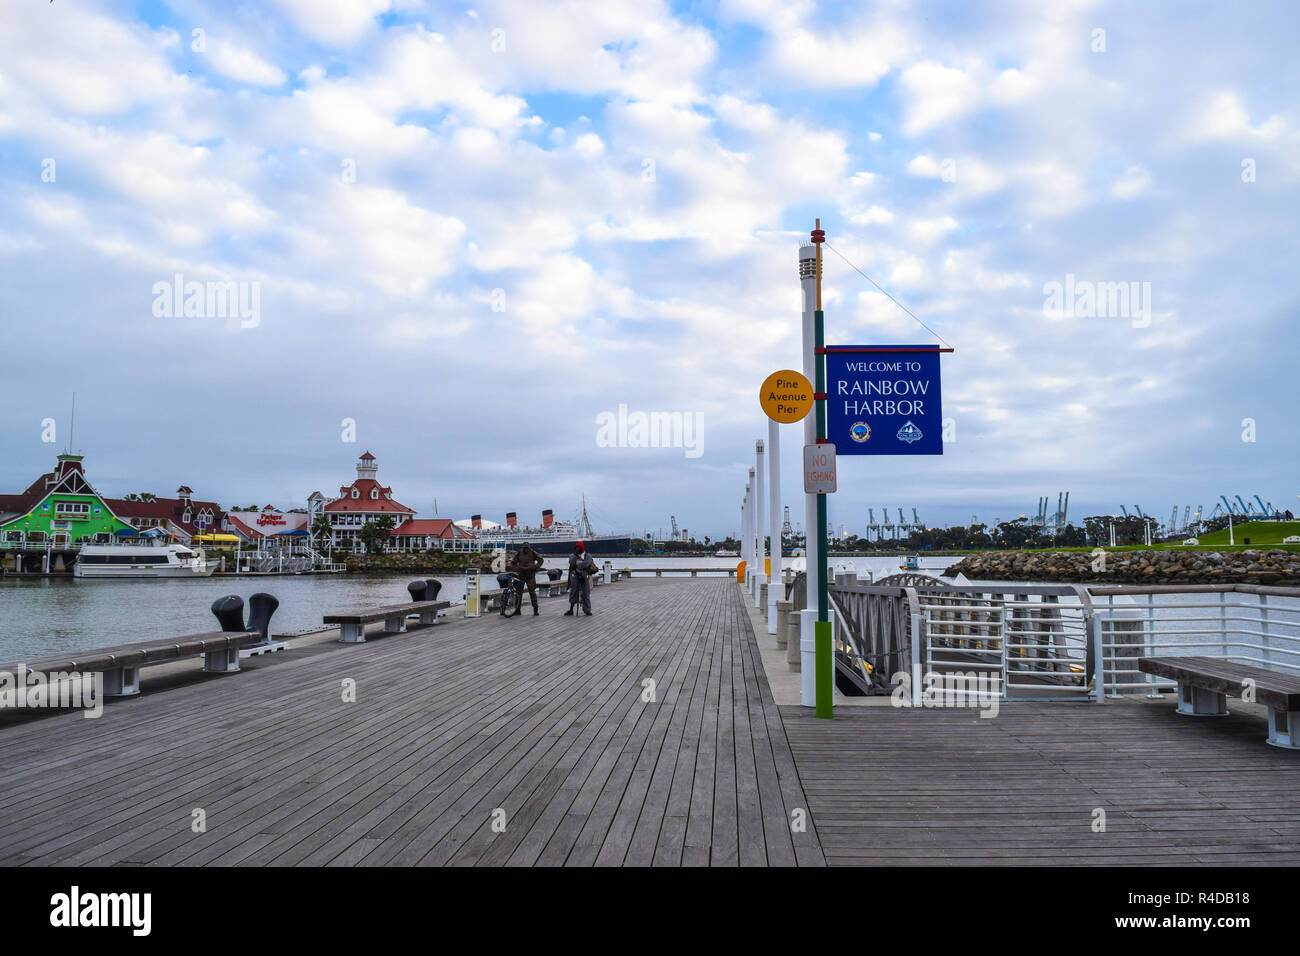 LONG BEACH, CA - FEBRUARY 20, 2017: Shoreline Village is a charming shopping village featuring colorful boardwalk shops and restaurants with Rainbow Harbor view. Stock Photo